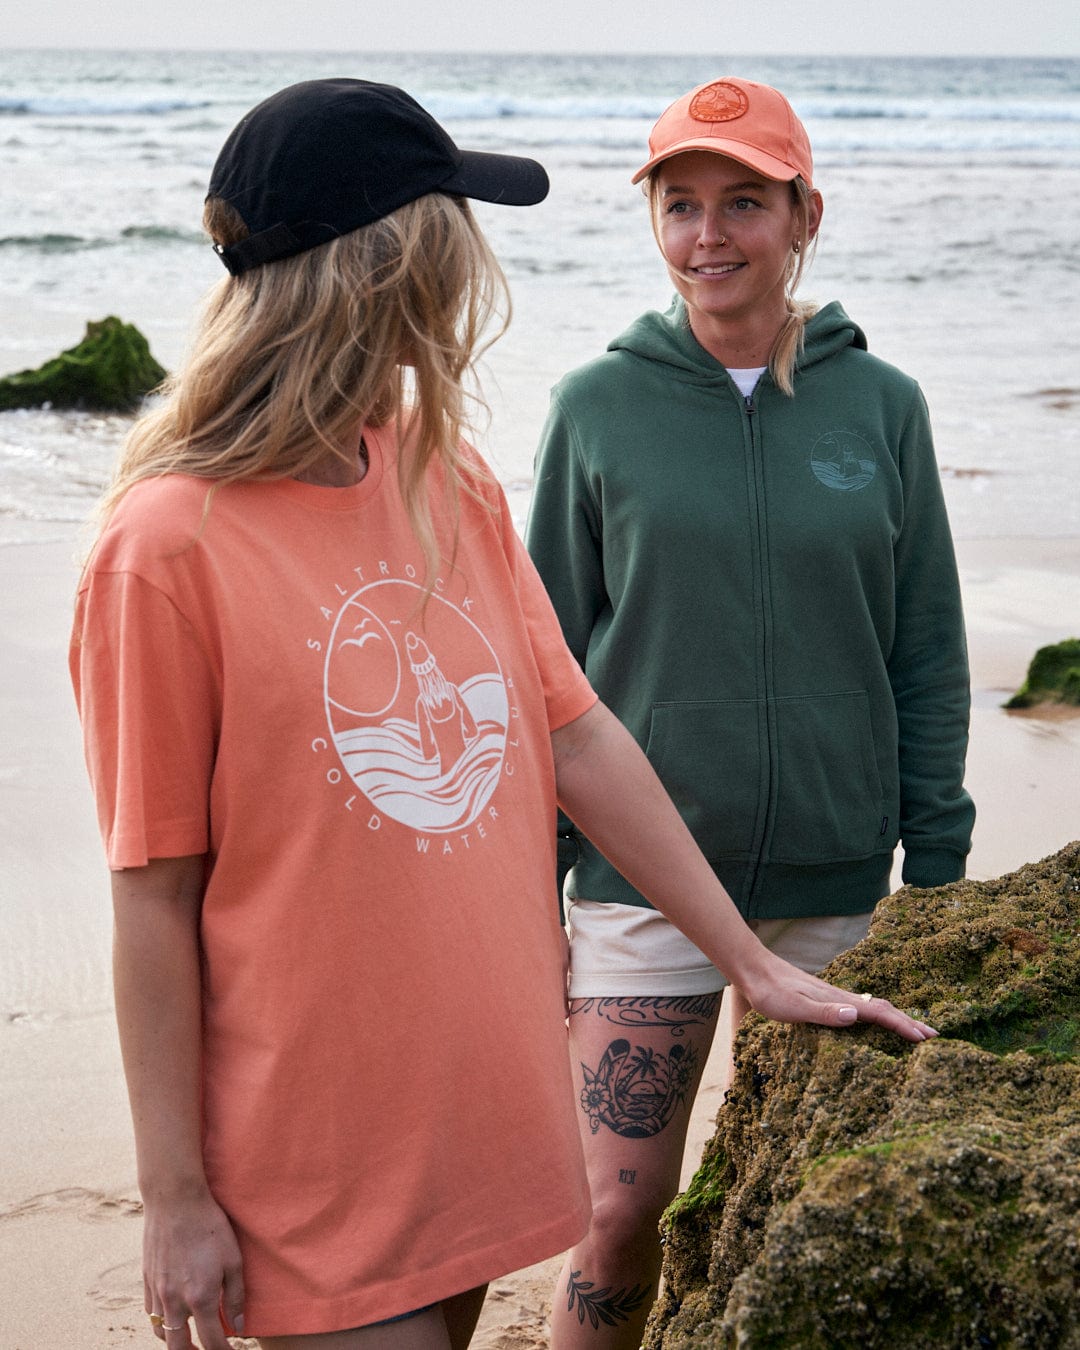 Two women wearing casual clothing with UPF protection and hats stand near a rocky beach. The woman on the left is facing away from the camera, revealing a black Gaitor 5 Panel UPF Cap with a graphic design on the back by Saltrock.